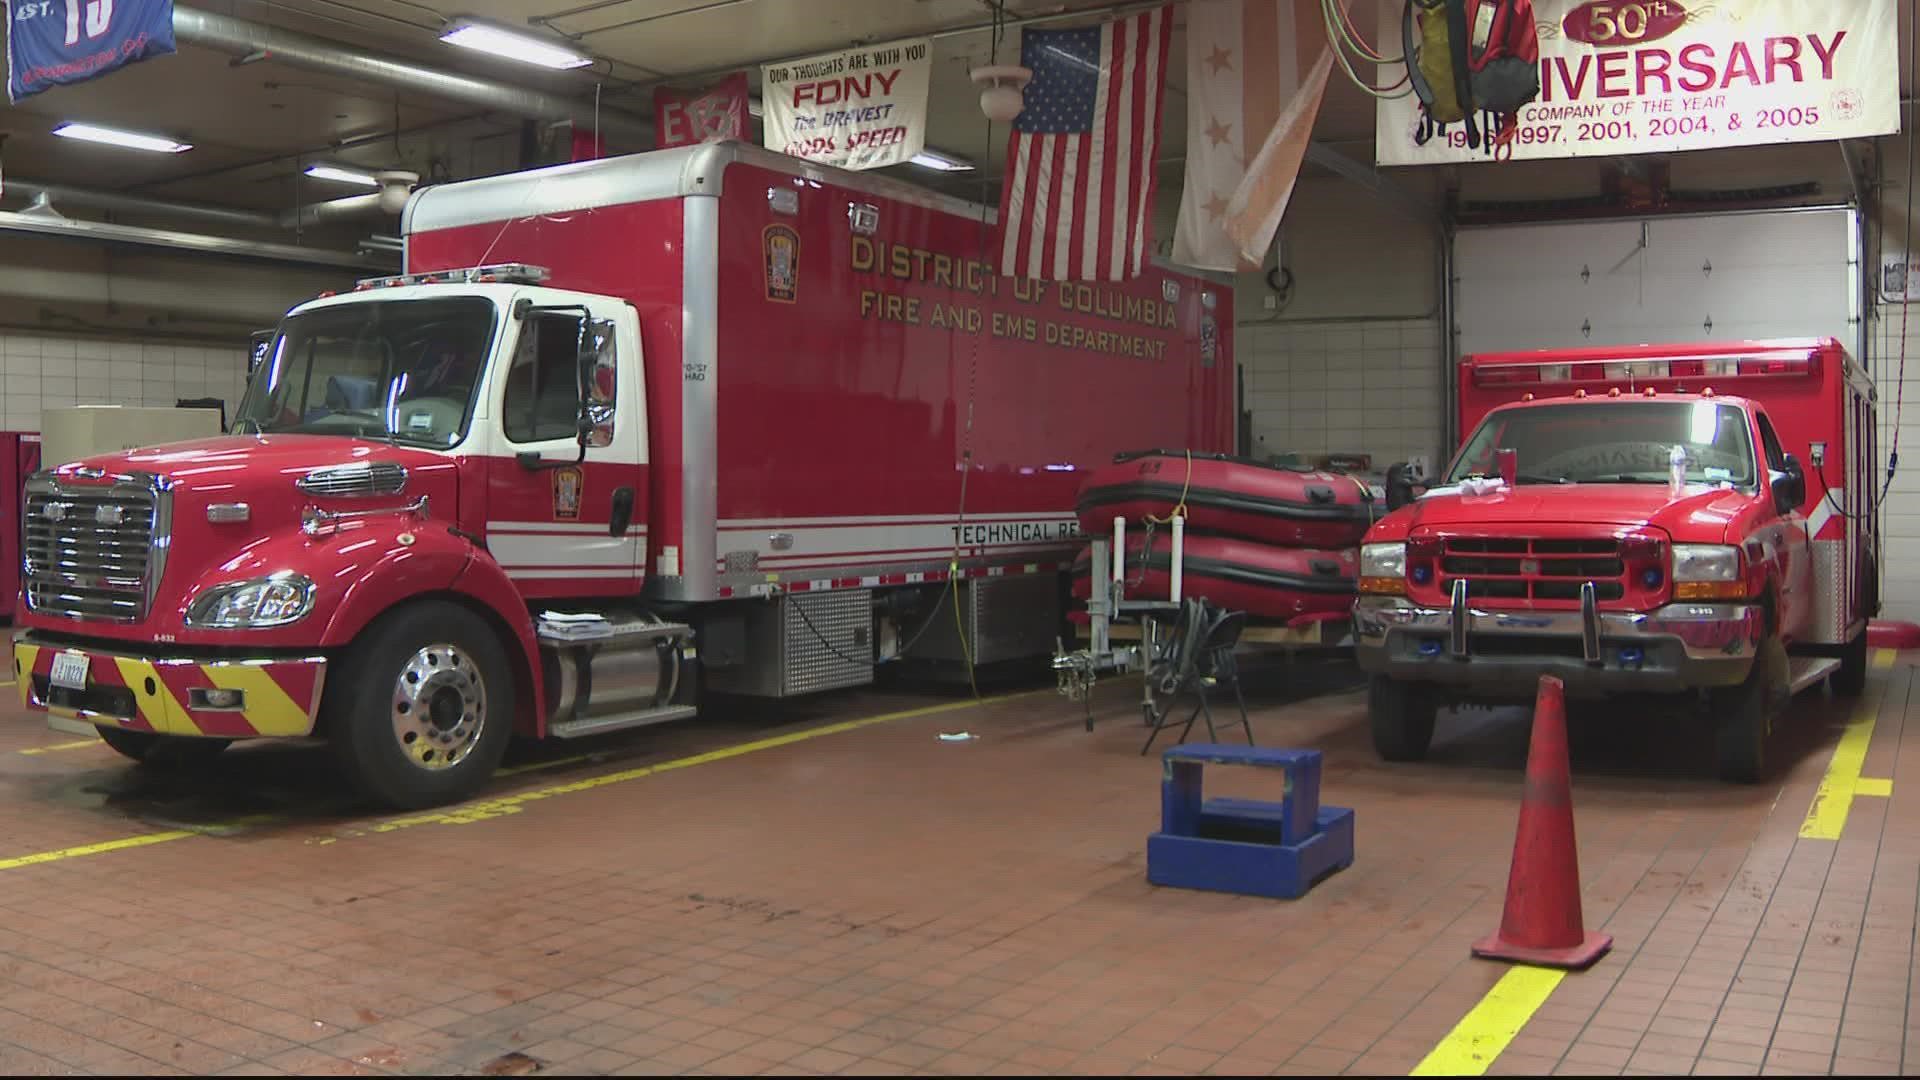 While many celebrate, New Year's Eve is a work day for first responders around the country.